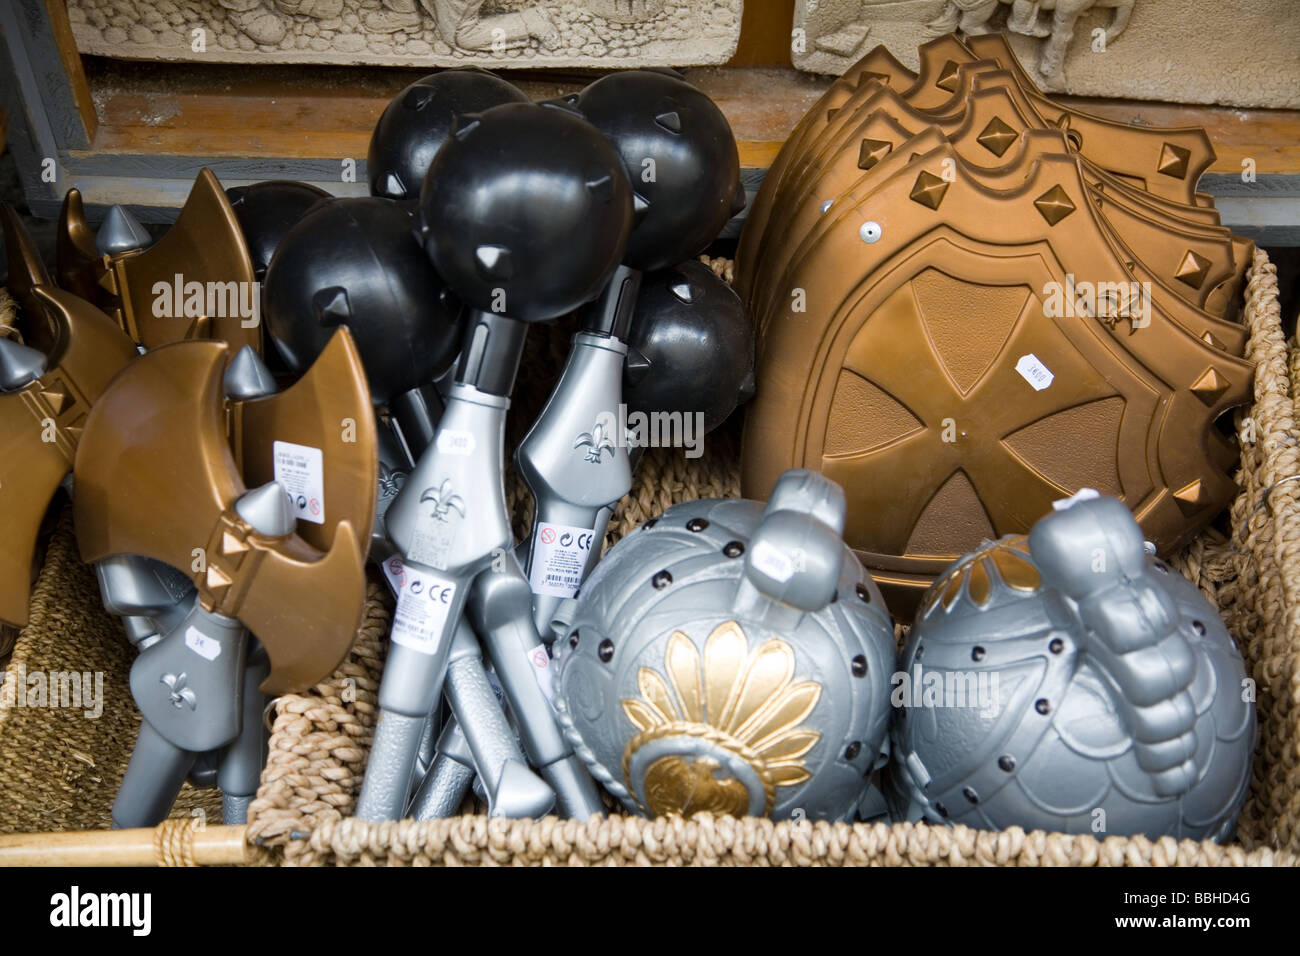 Toy replicas of various medieval weapons displayed in Carcassonne France Stock Photo